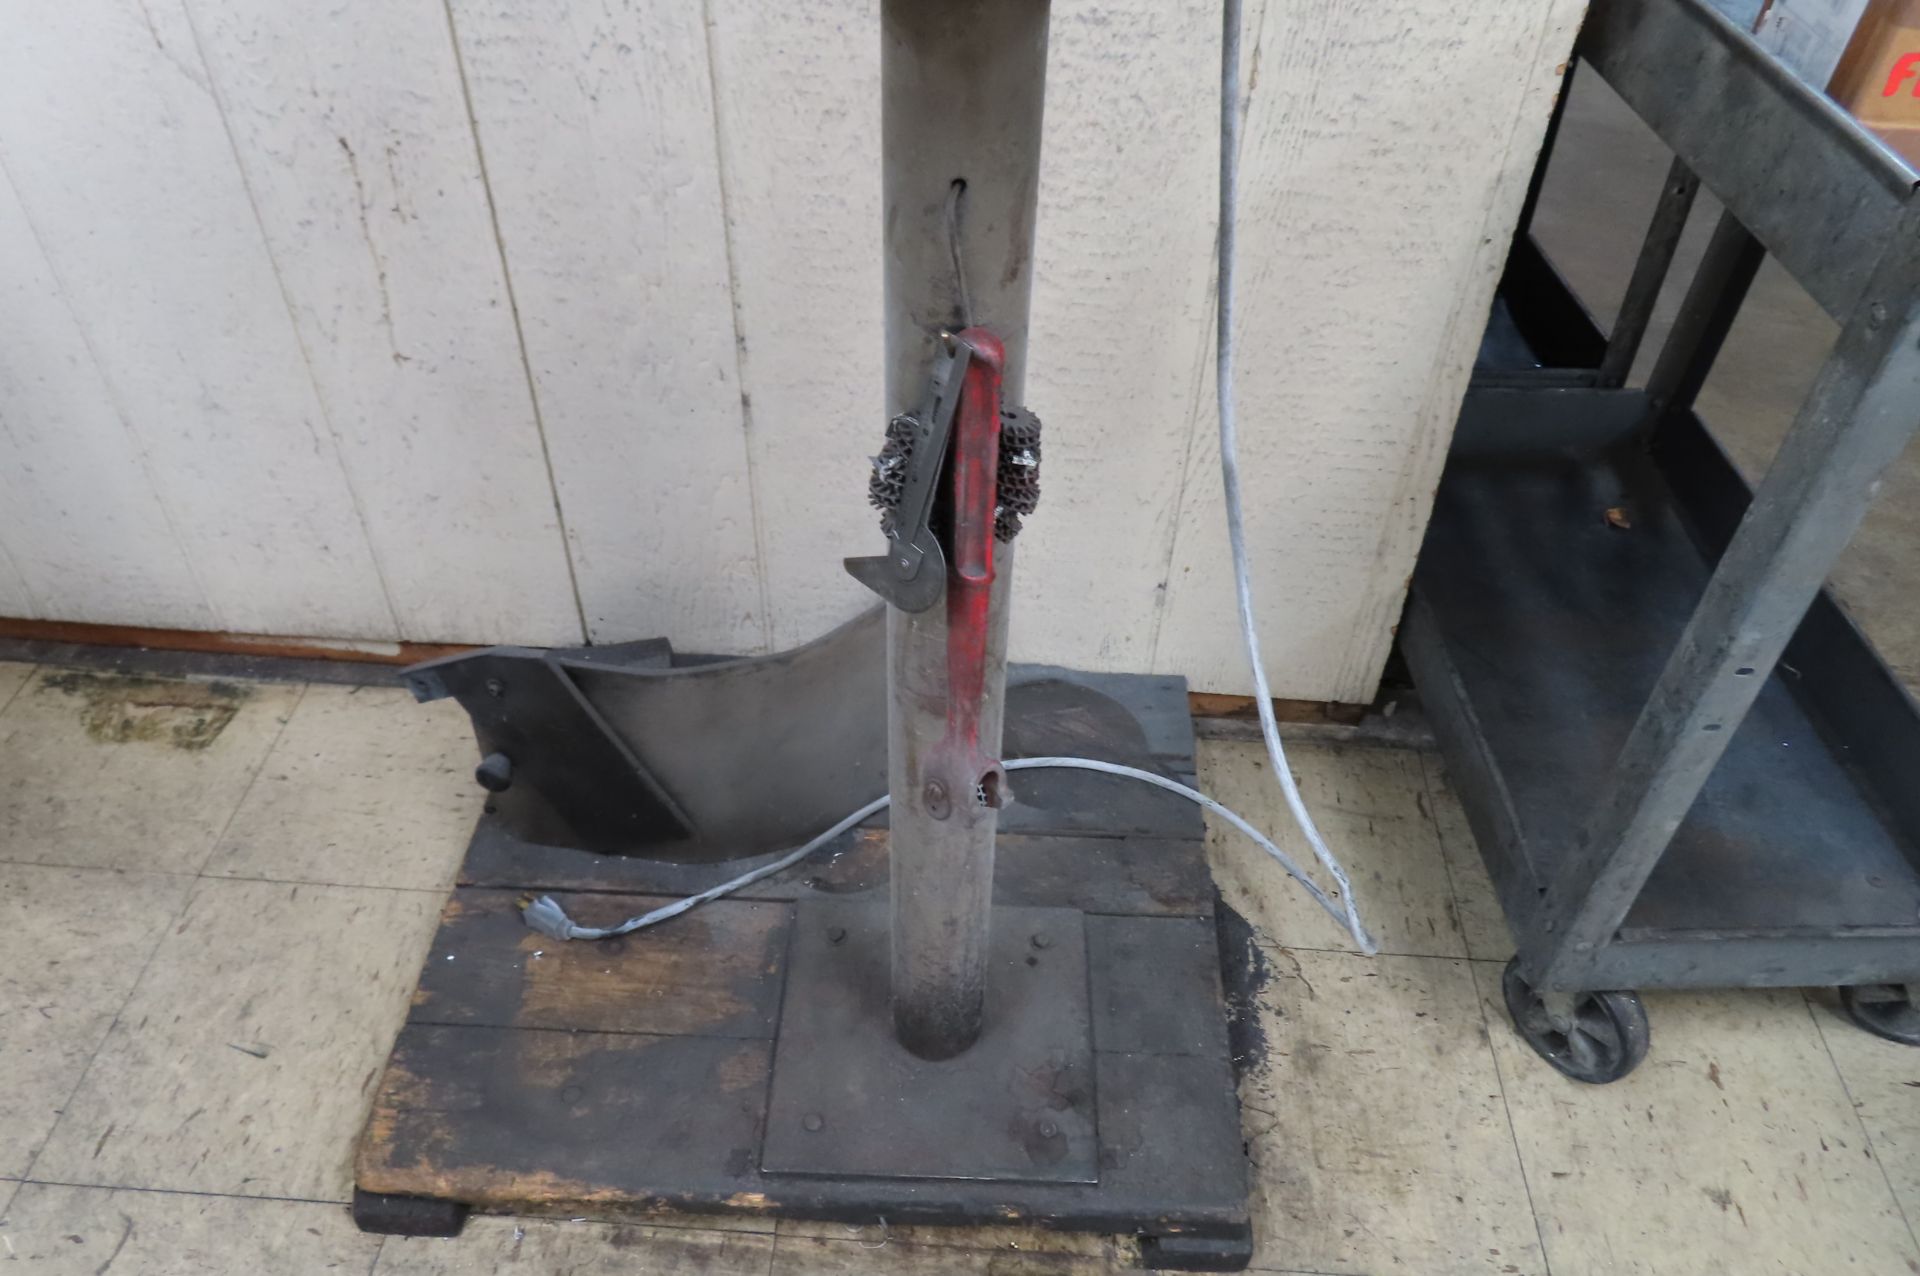 6 IN. DOUBLE END BENCH GRINDER WITH STAND - Image 3 of 3